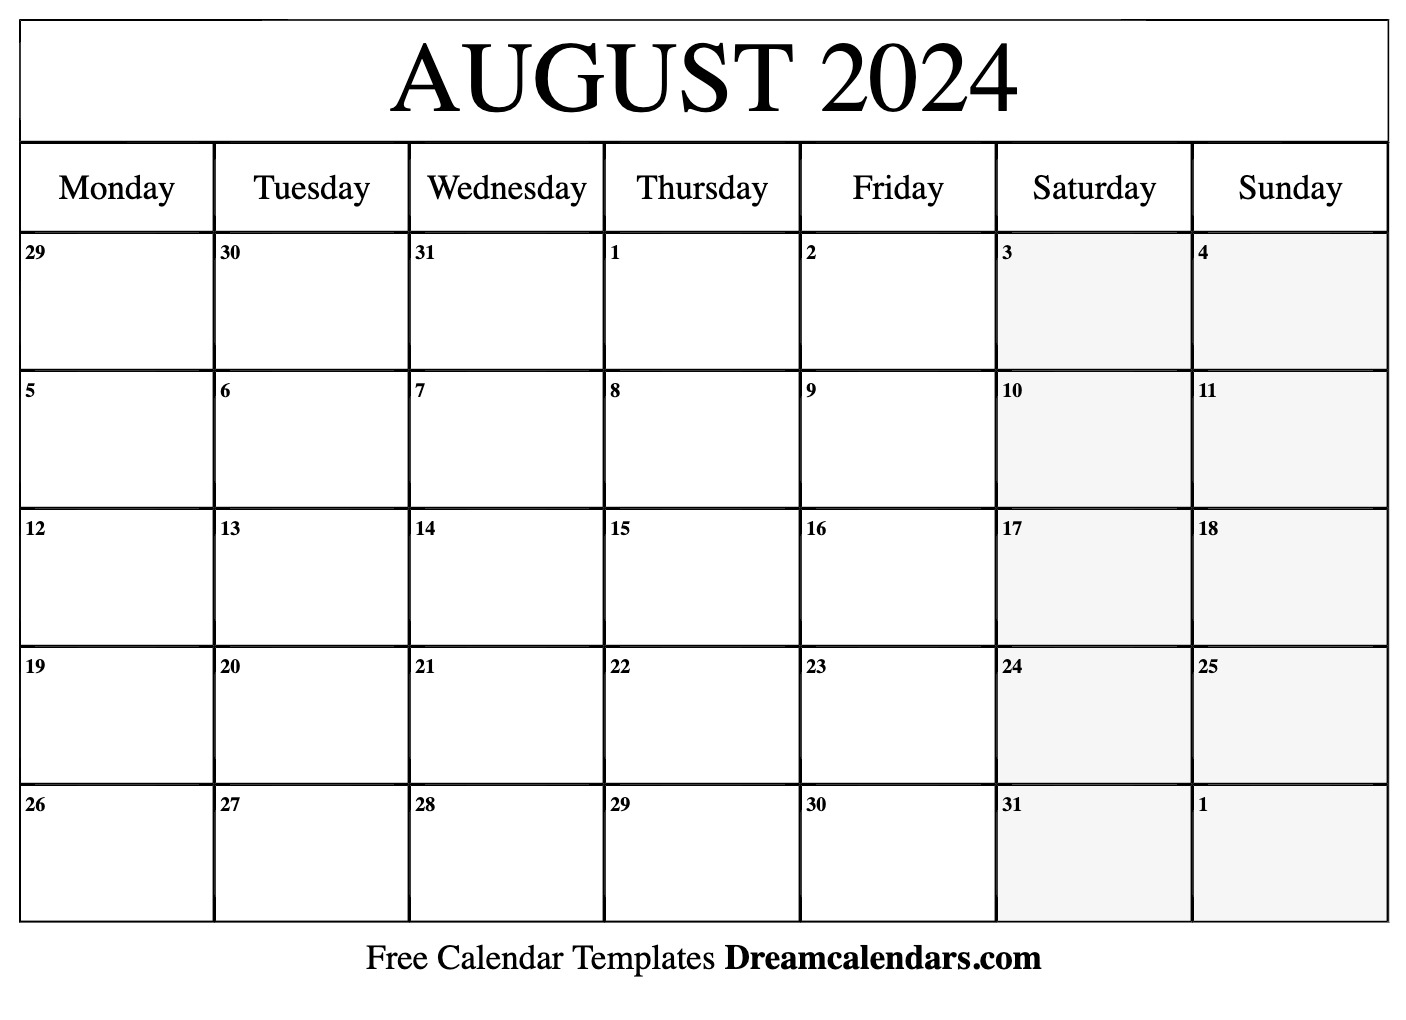 August 2024 Calendar | Free Blank Printable With Holidays for Printable Calendar August 2024 To June 2024